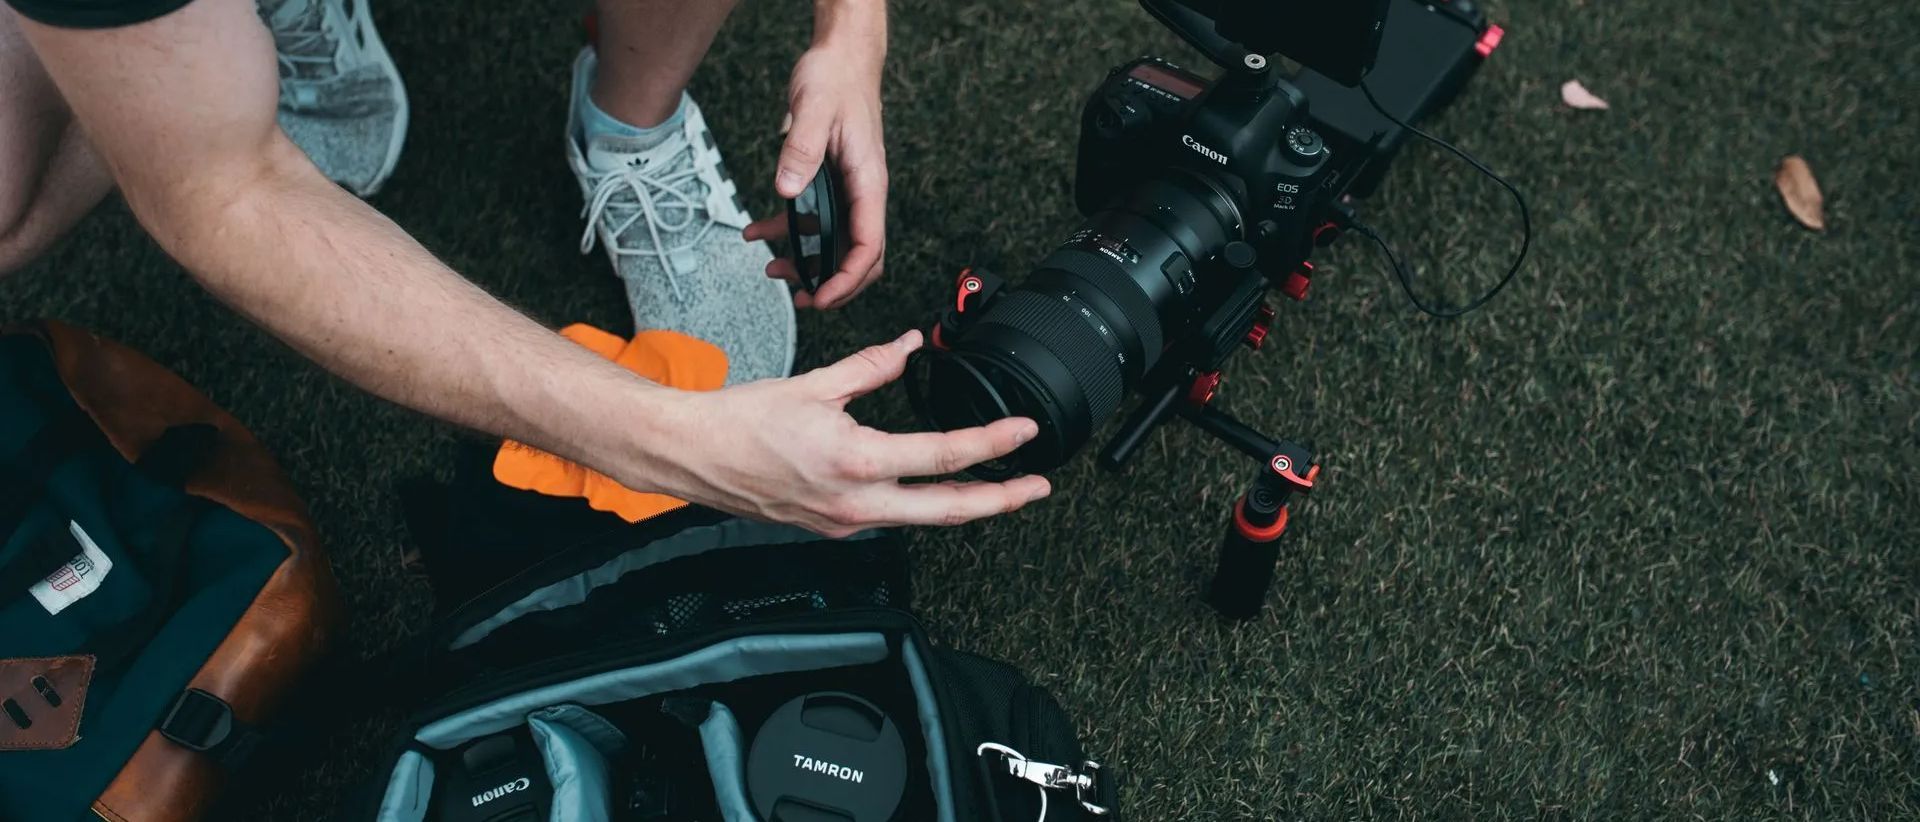 a person is putting a camera lens into a backpack .